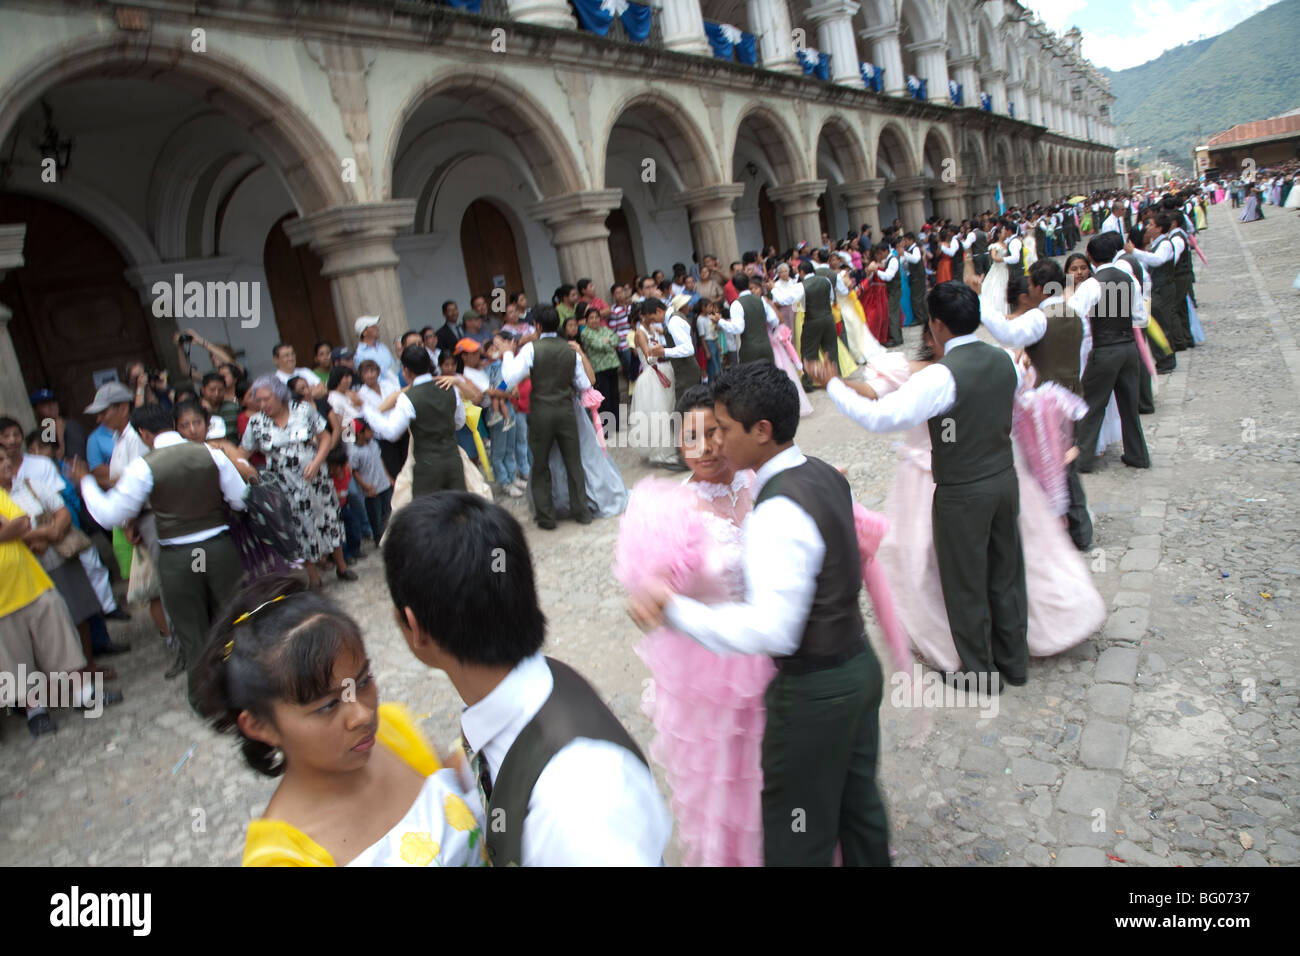 Independence Day Parade on 15 September in Antigua Guatemala. Stock Photo